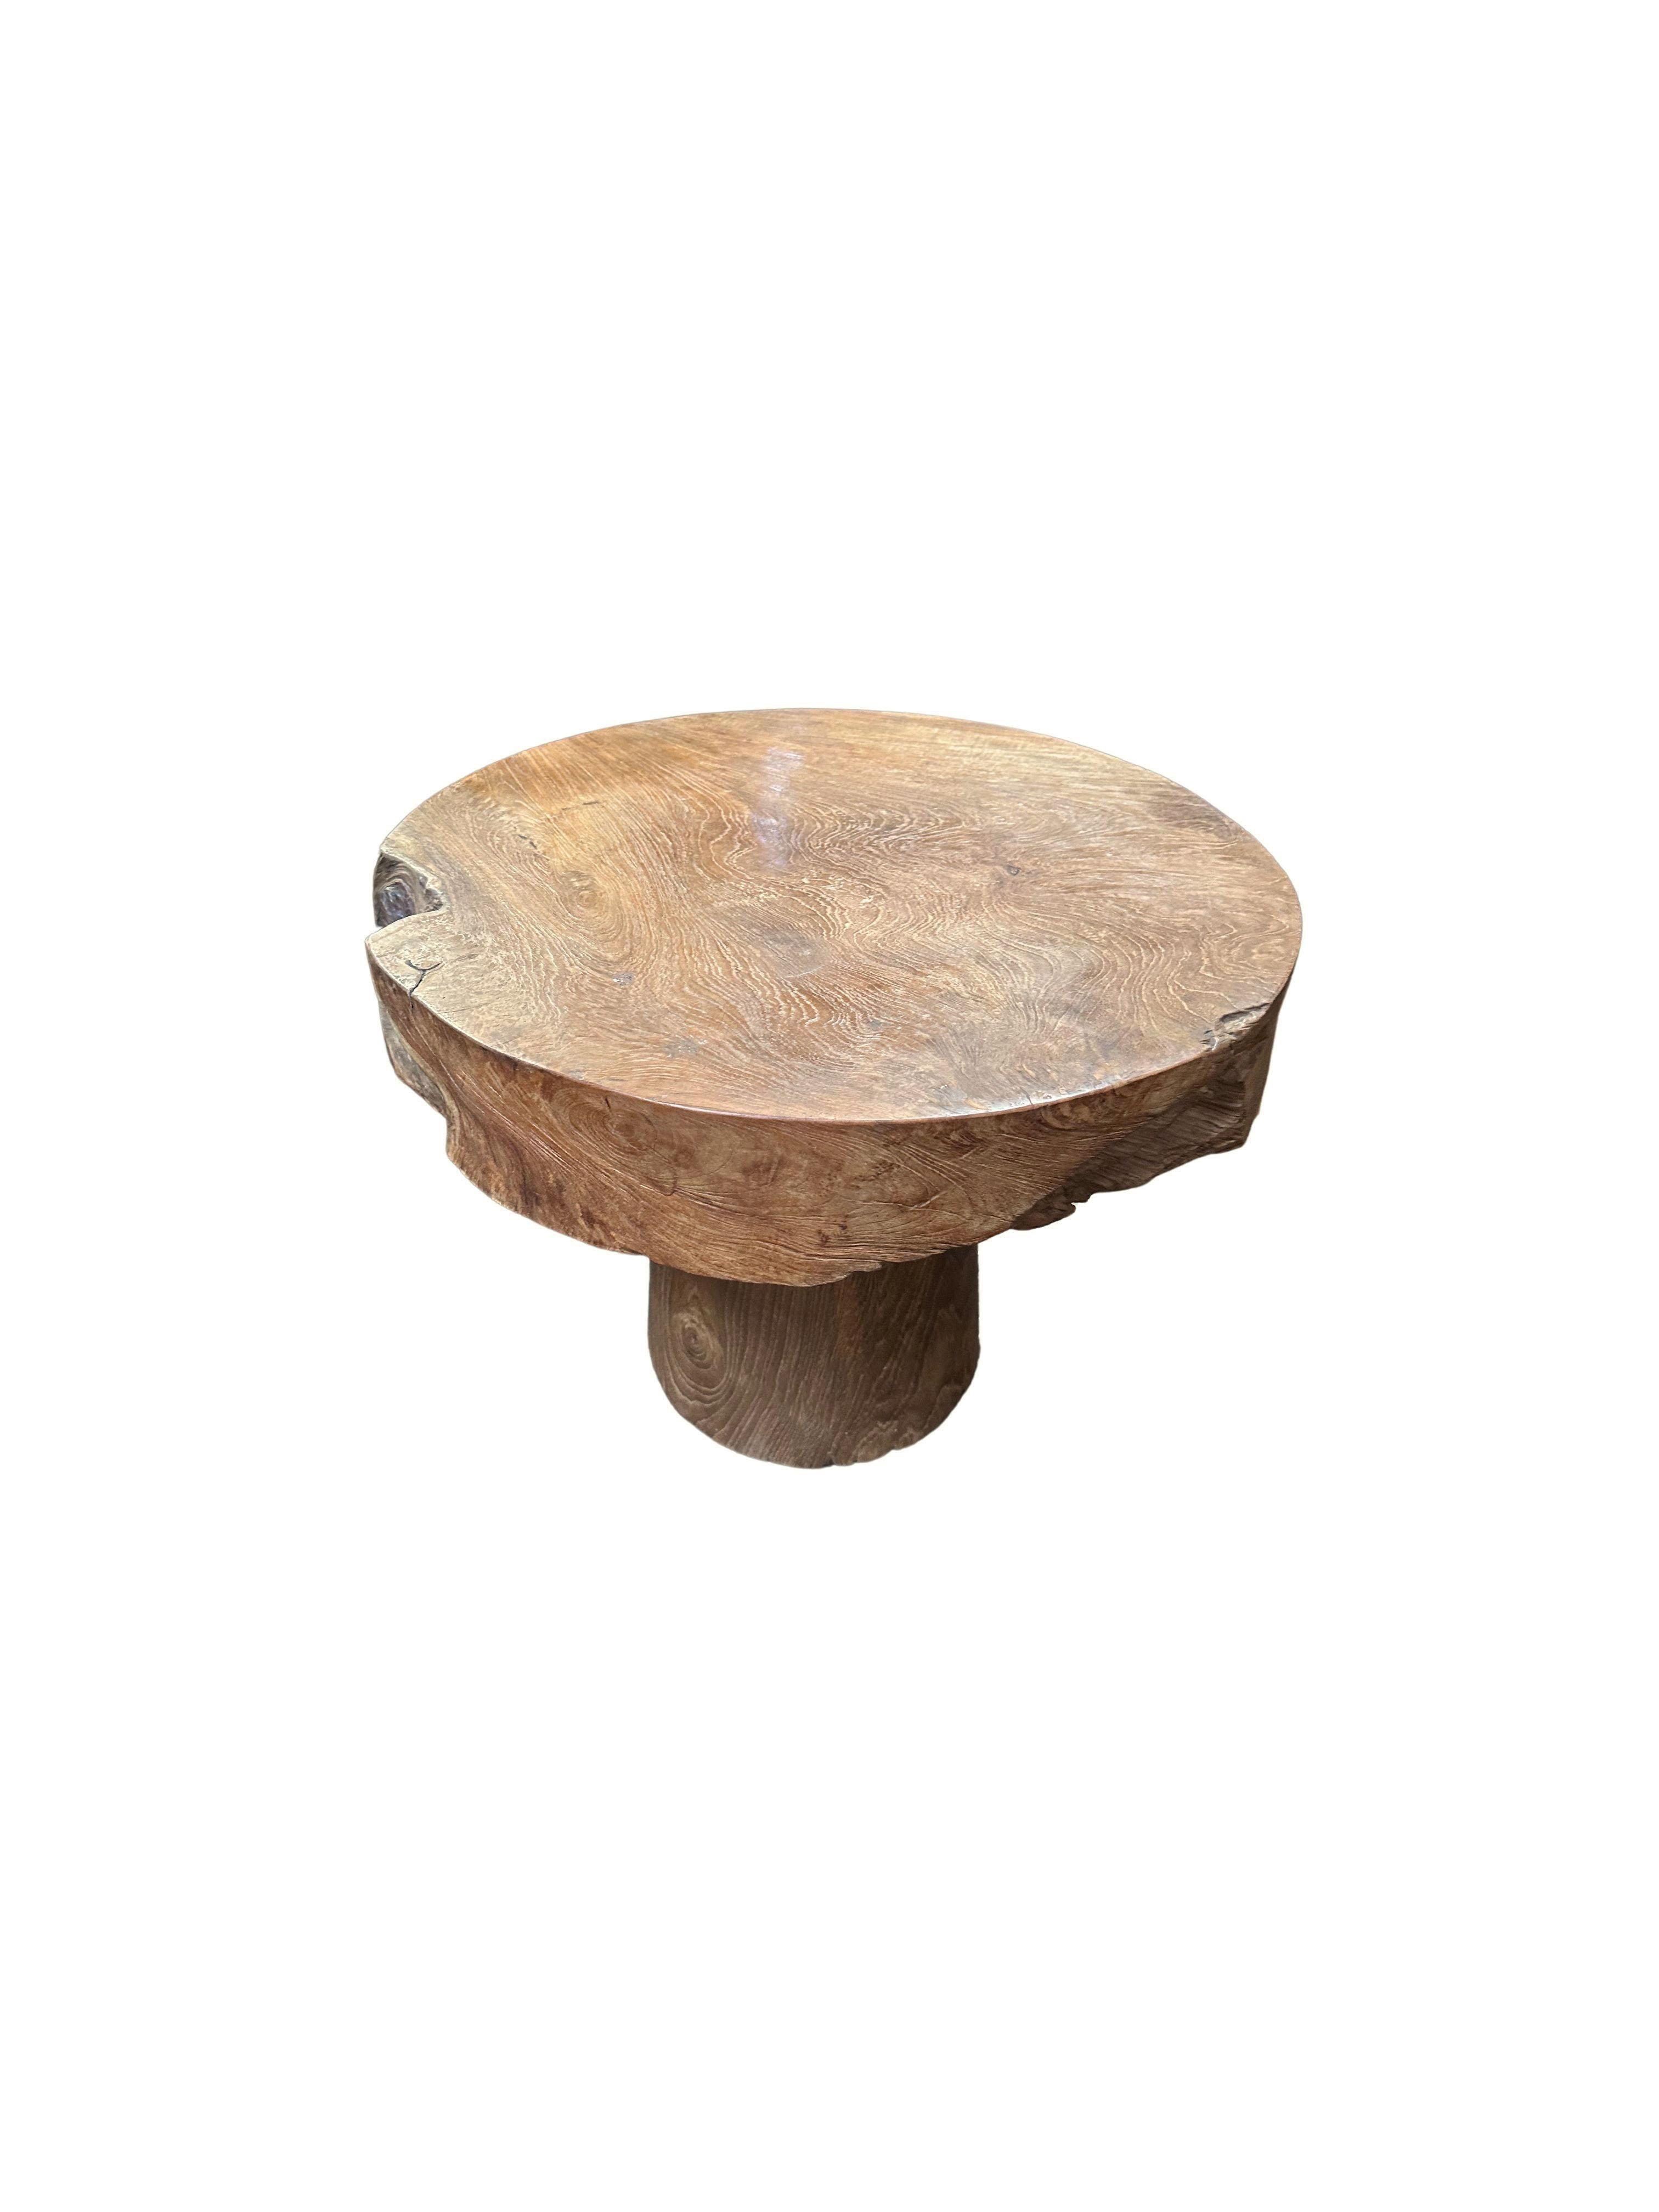 Indonesian Sculptural Round Table Crafted from Teak Wood, Natural Finish For Sale